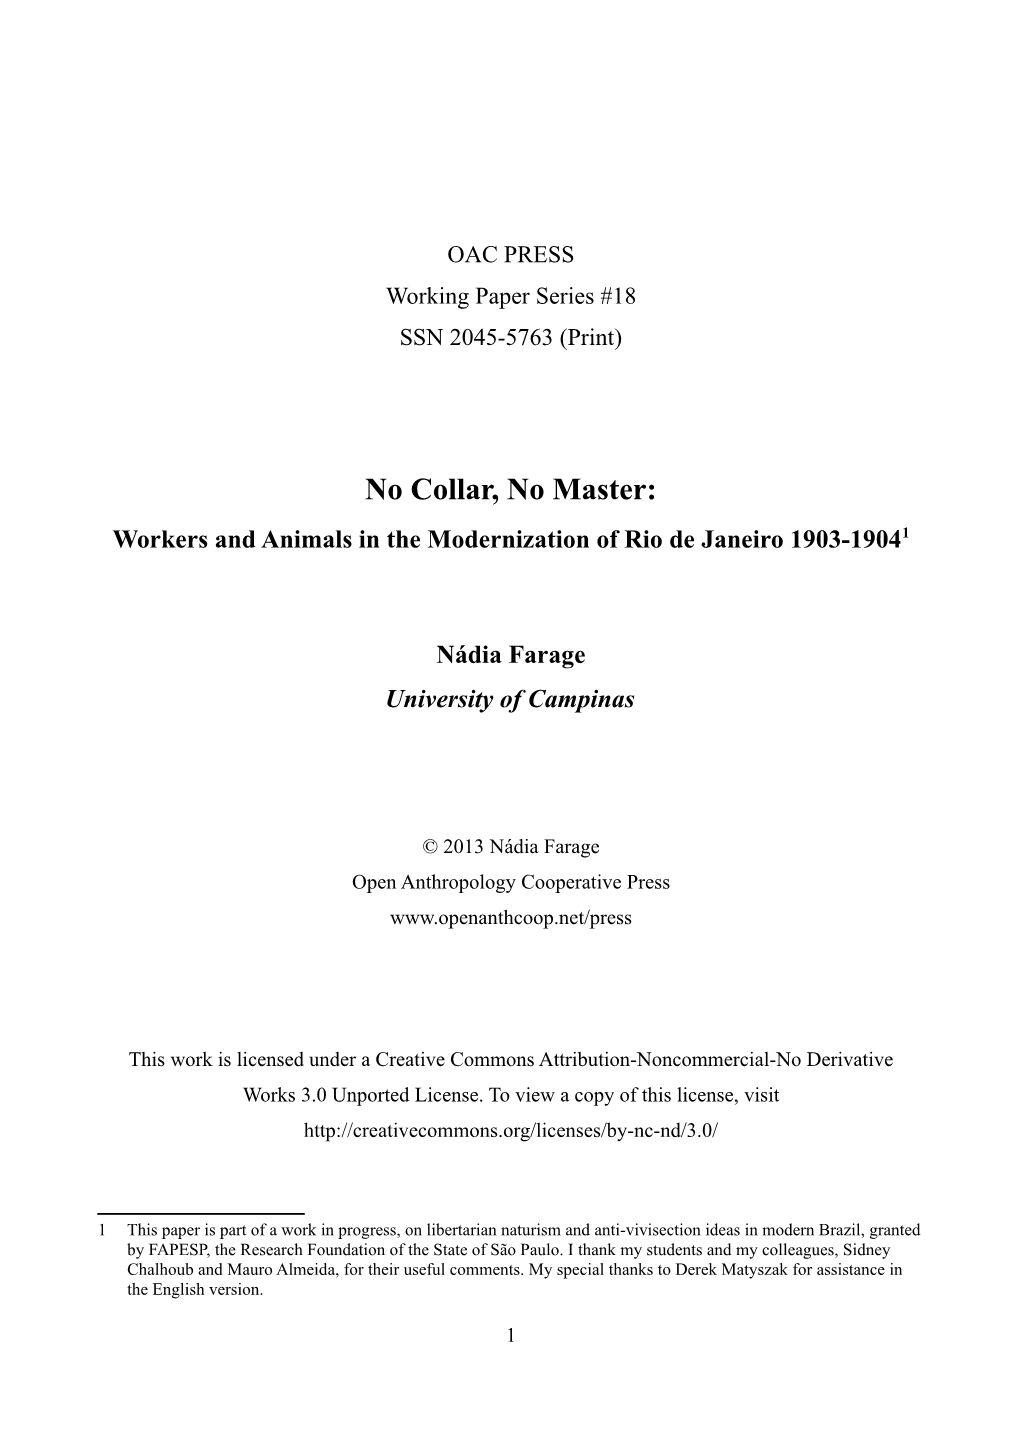 No Collar, No Master: Workers and Animals in the Modernization of Rio De Janeiro 1903-19041